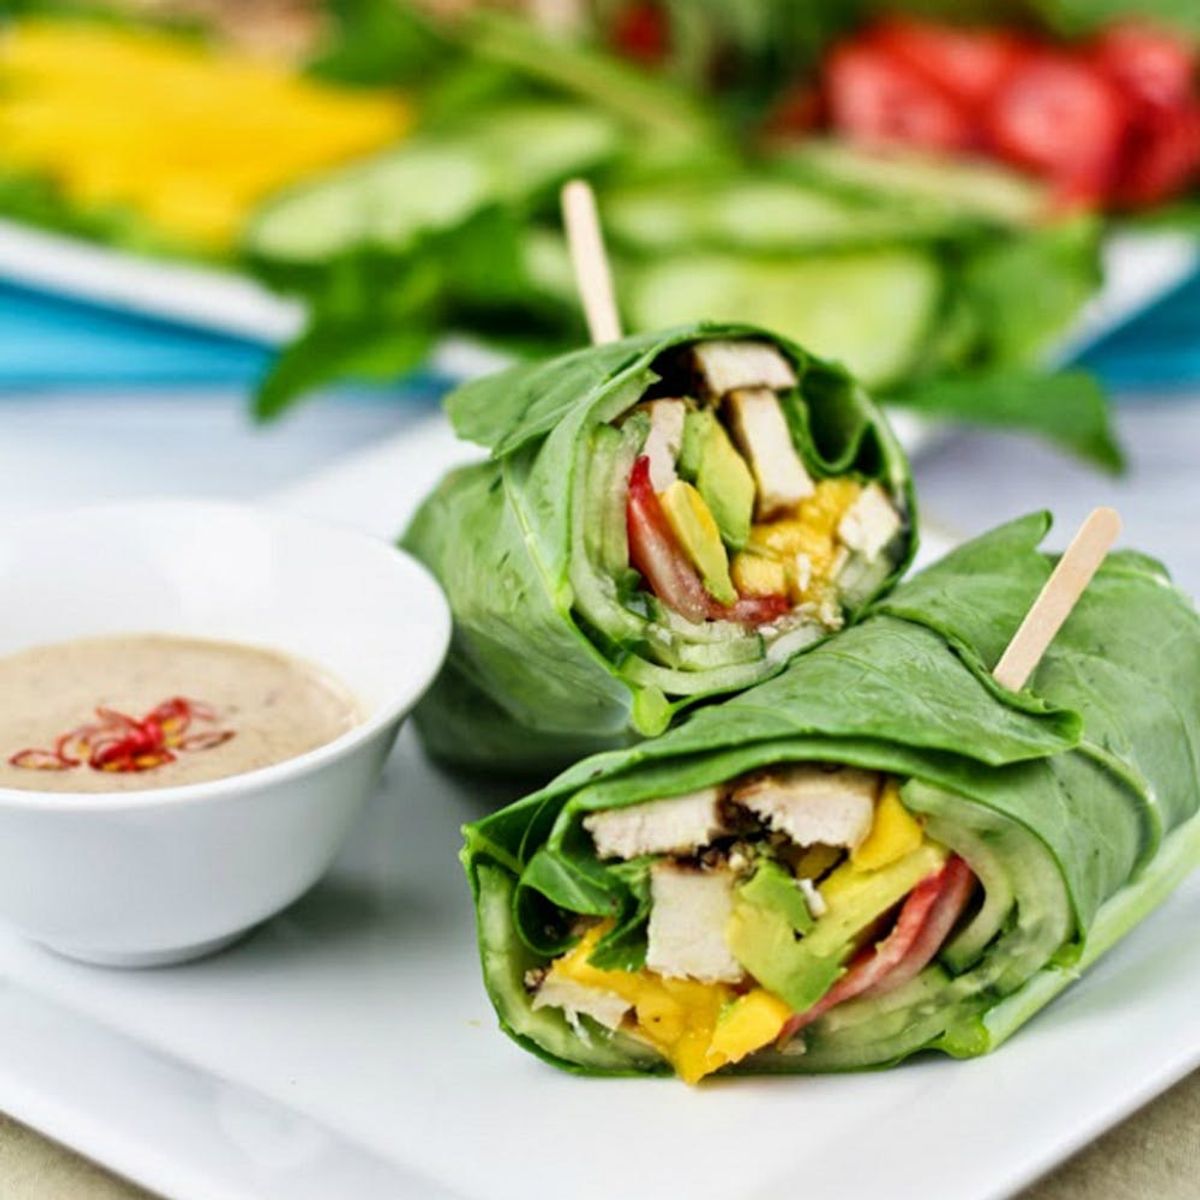 10 Low-Carb Sandwiches to Pack for Lunch This Week